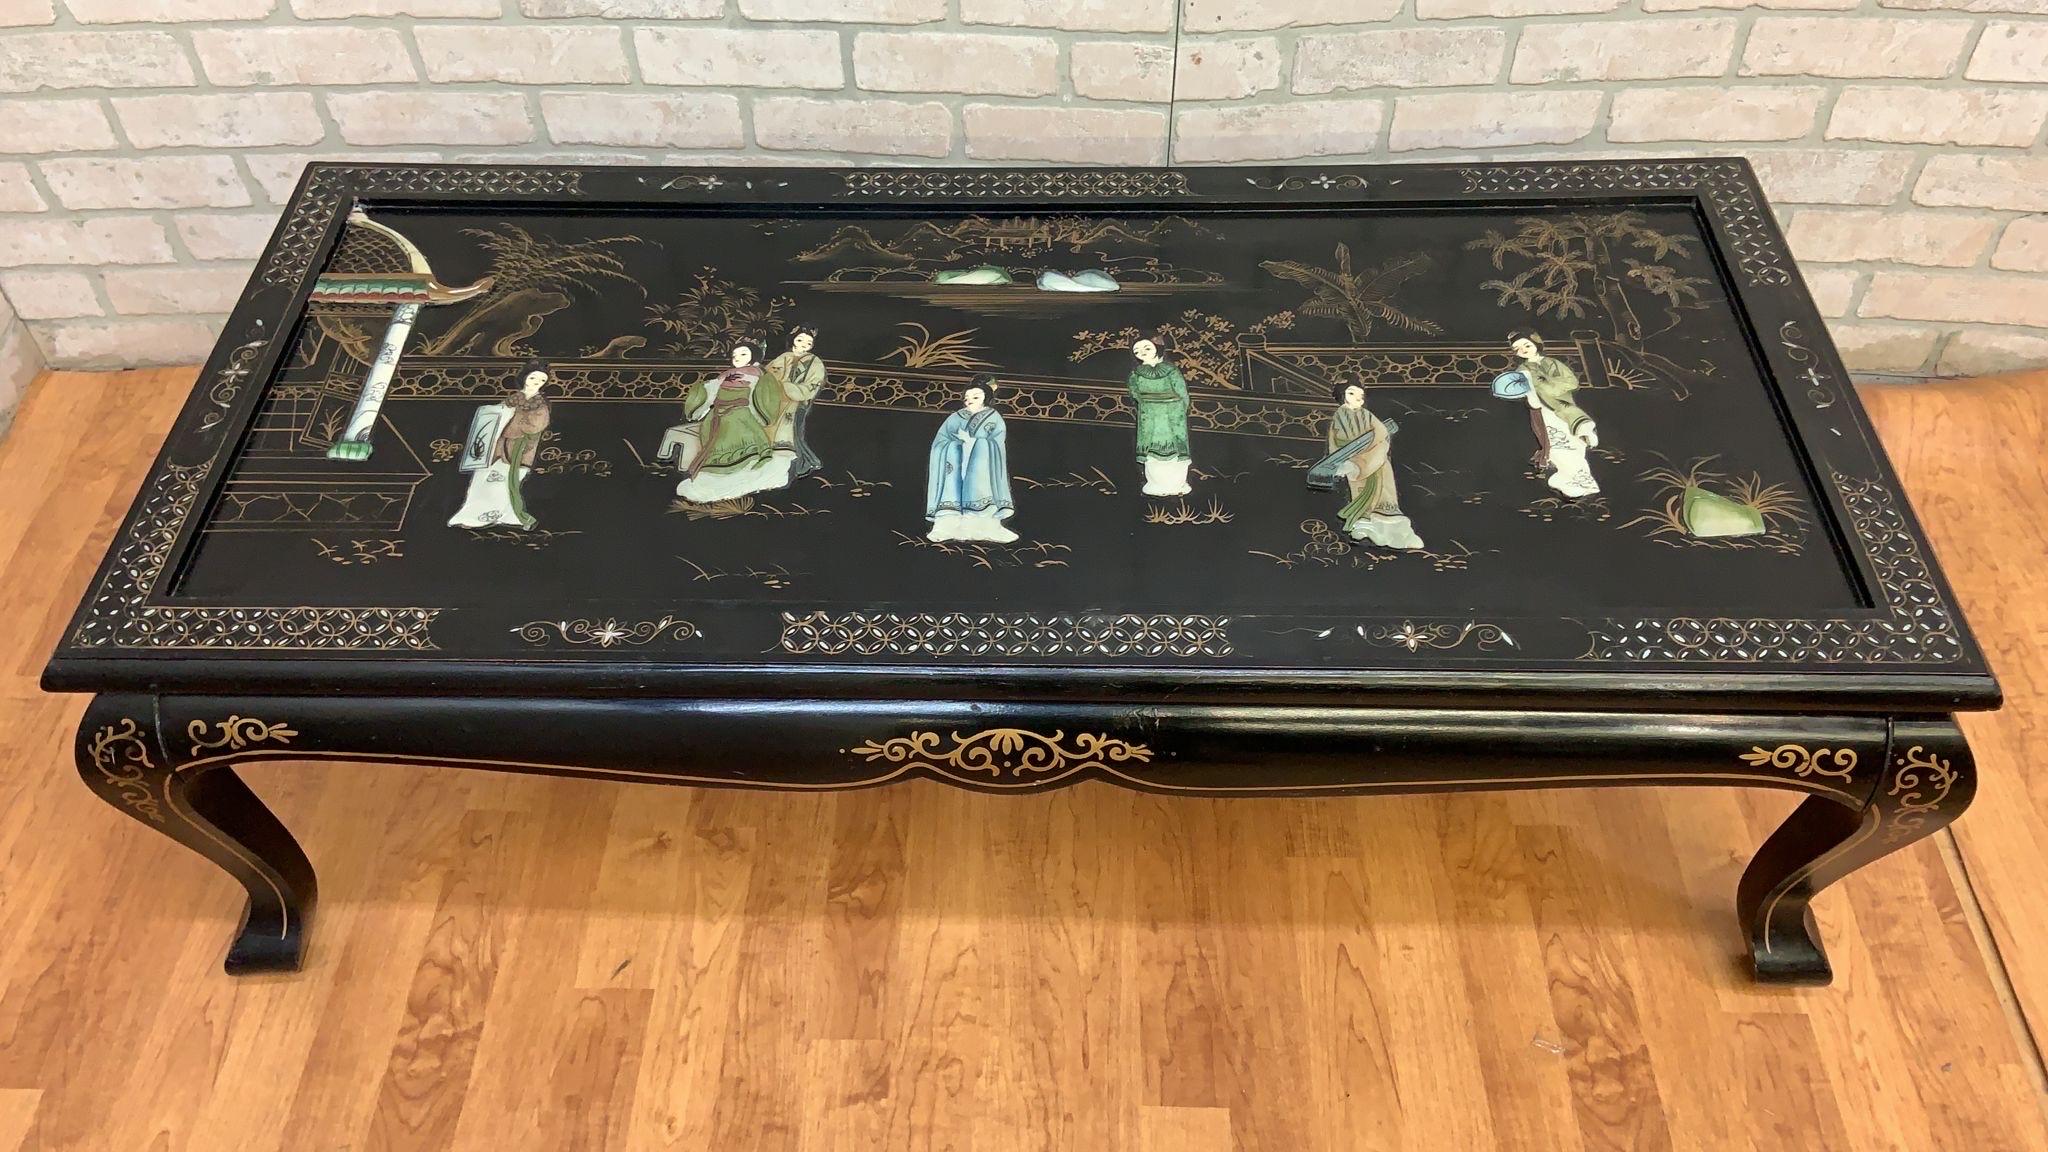 Vintage Mid Century Modern Black Lacquer Chinoiserie Coffee Table with Mother Of Pearl Inlays 

A mid century modern chinoiserie, black lacquer and partly exposed wood coffee table with inlaid mother of pearl on curved legs. The surface depicts